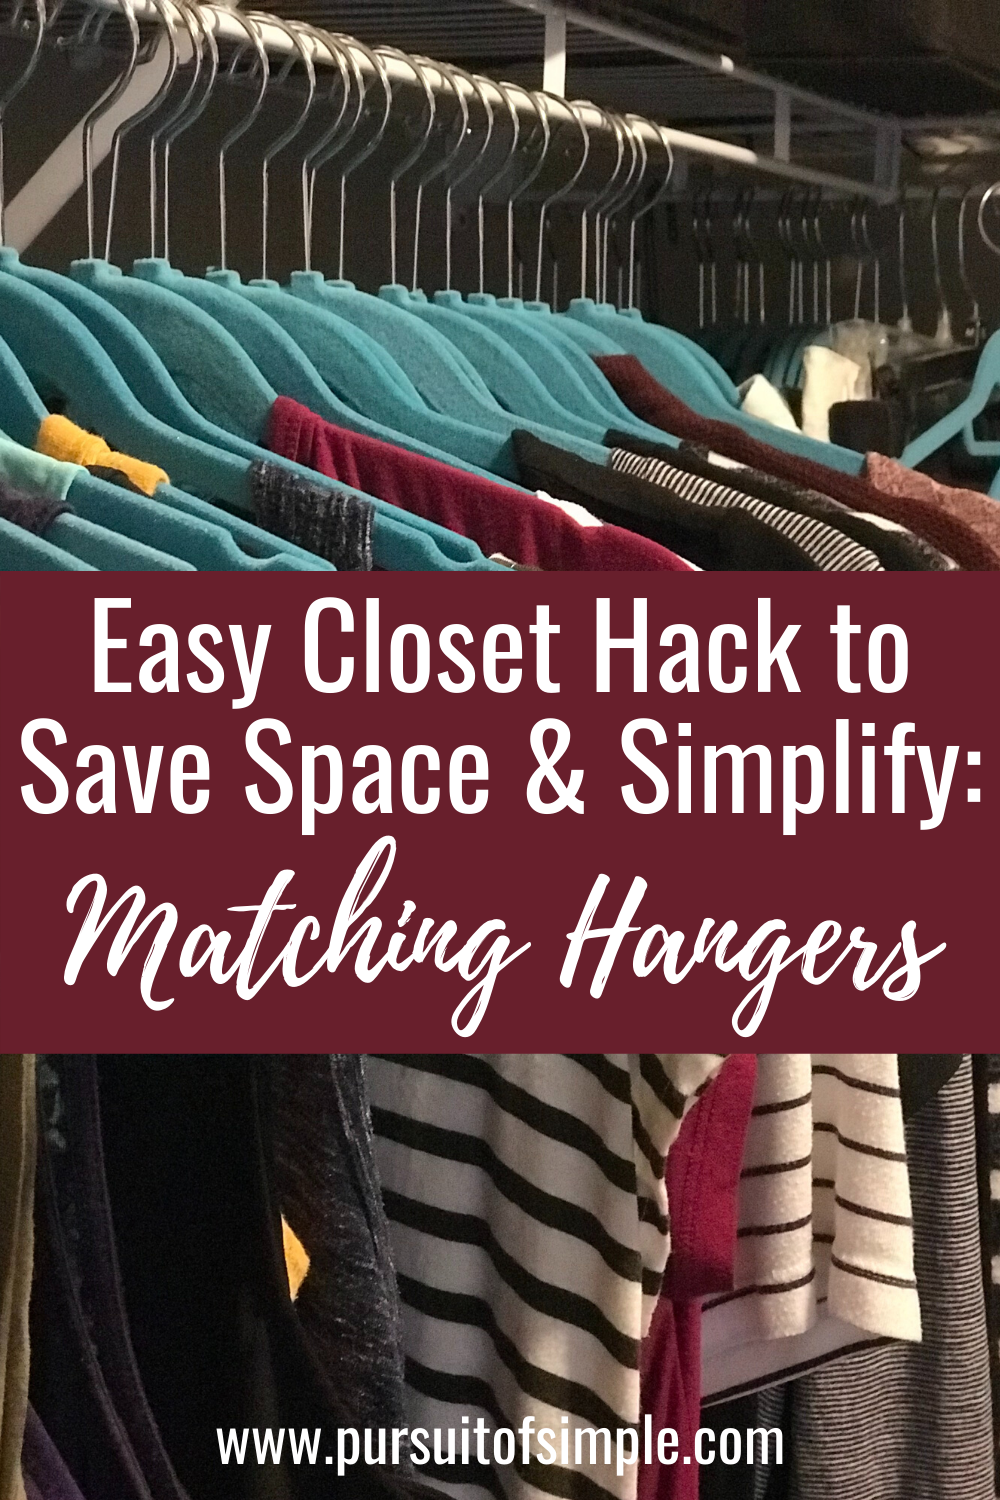 https://pursuitofsimple.com/wp-content/uploads/2020/06/Easy-Closet-Hack-to-Save-Space.png